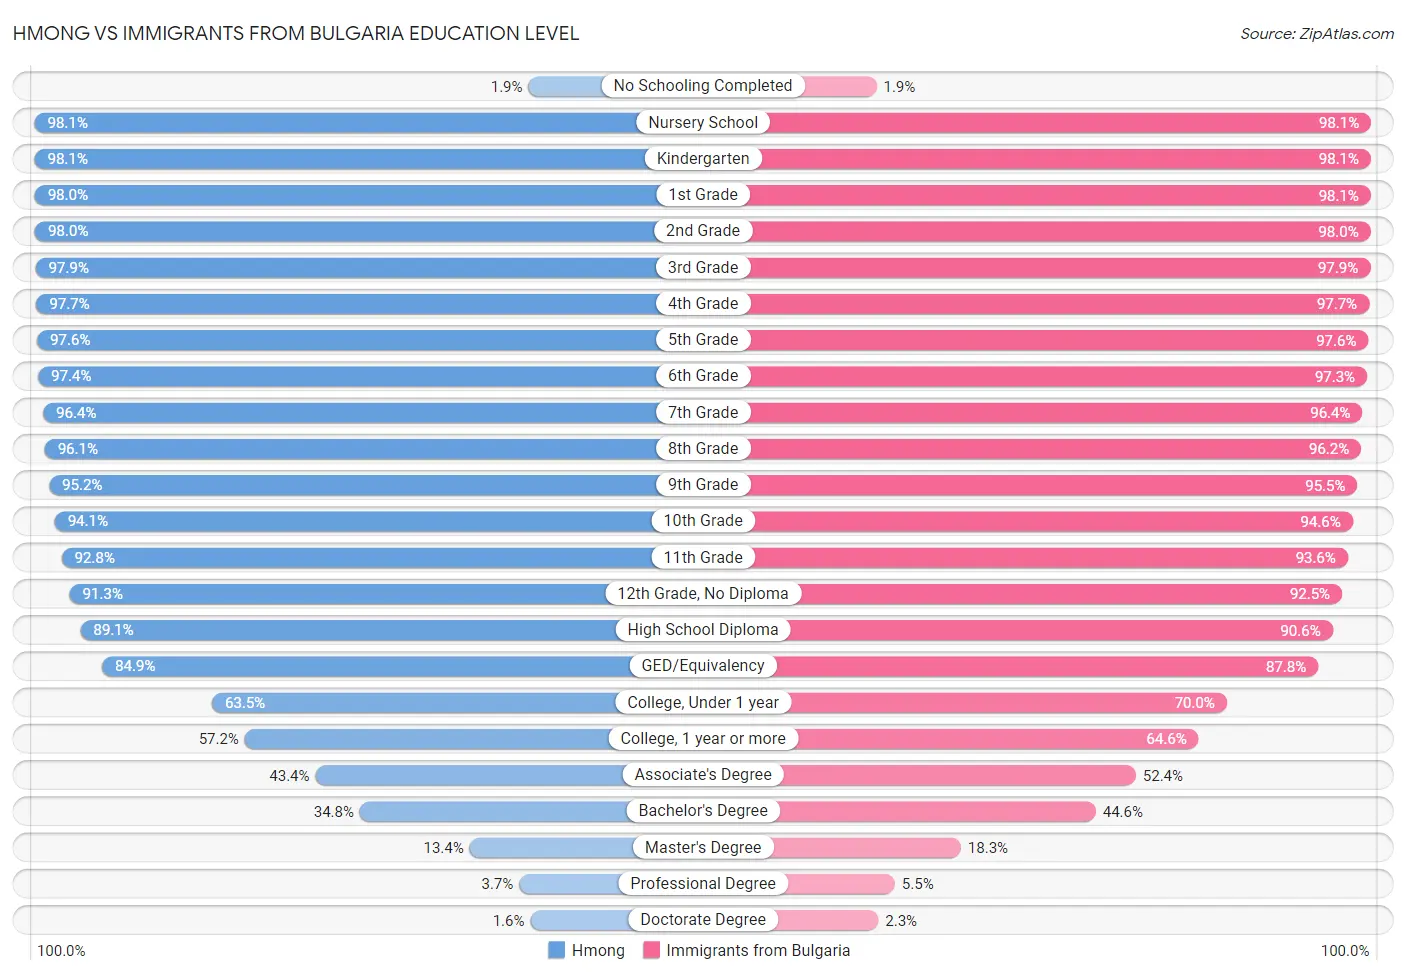 Hmong vs Immigrants from Bulgaria Education Level